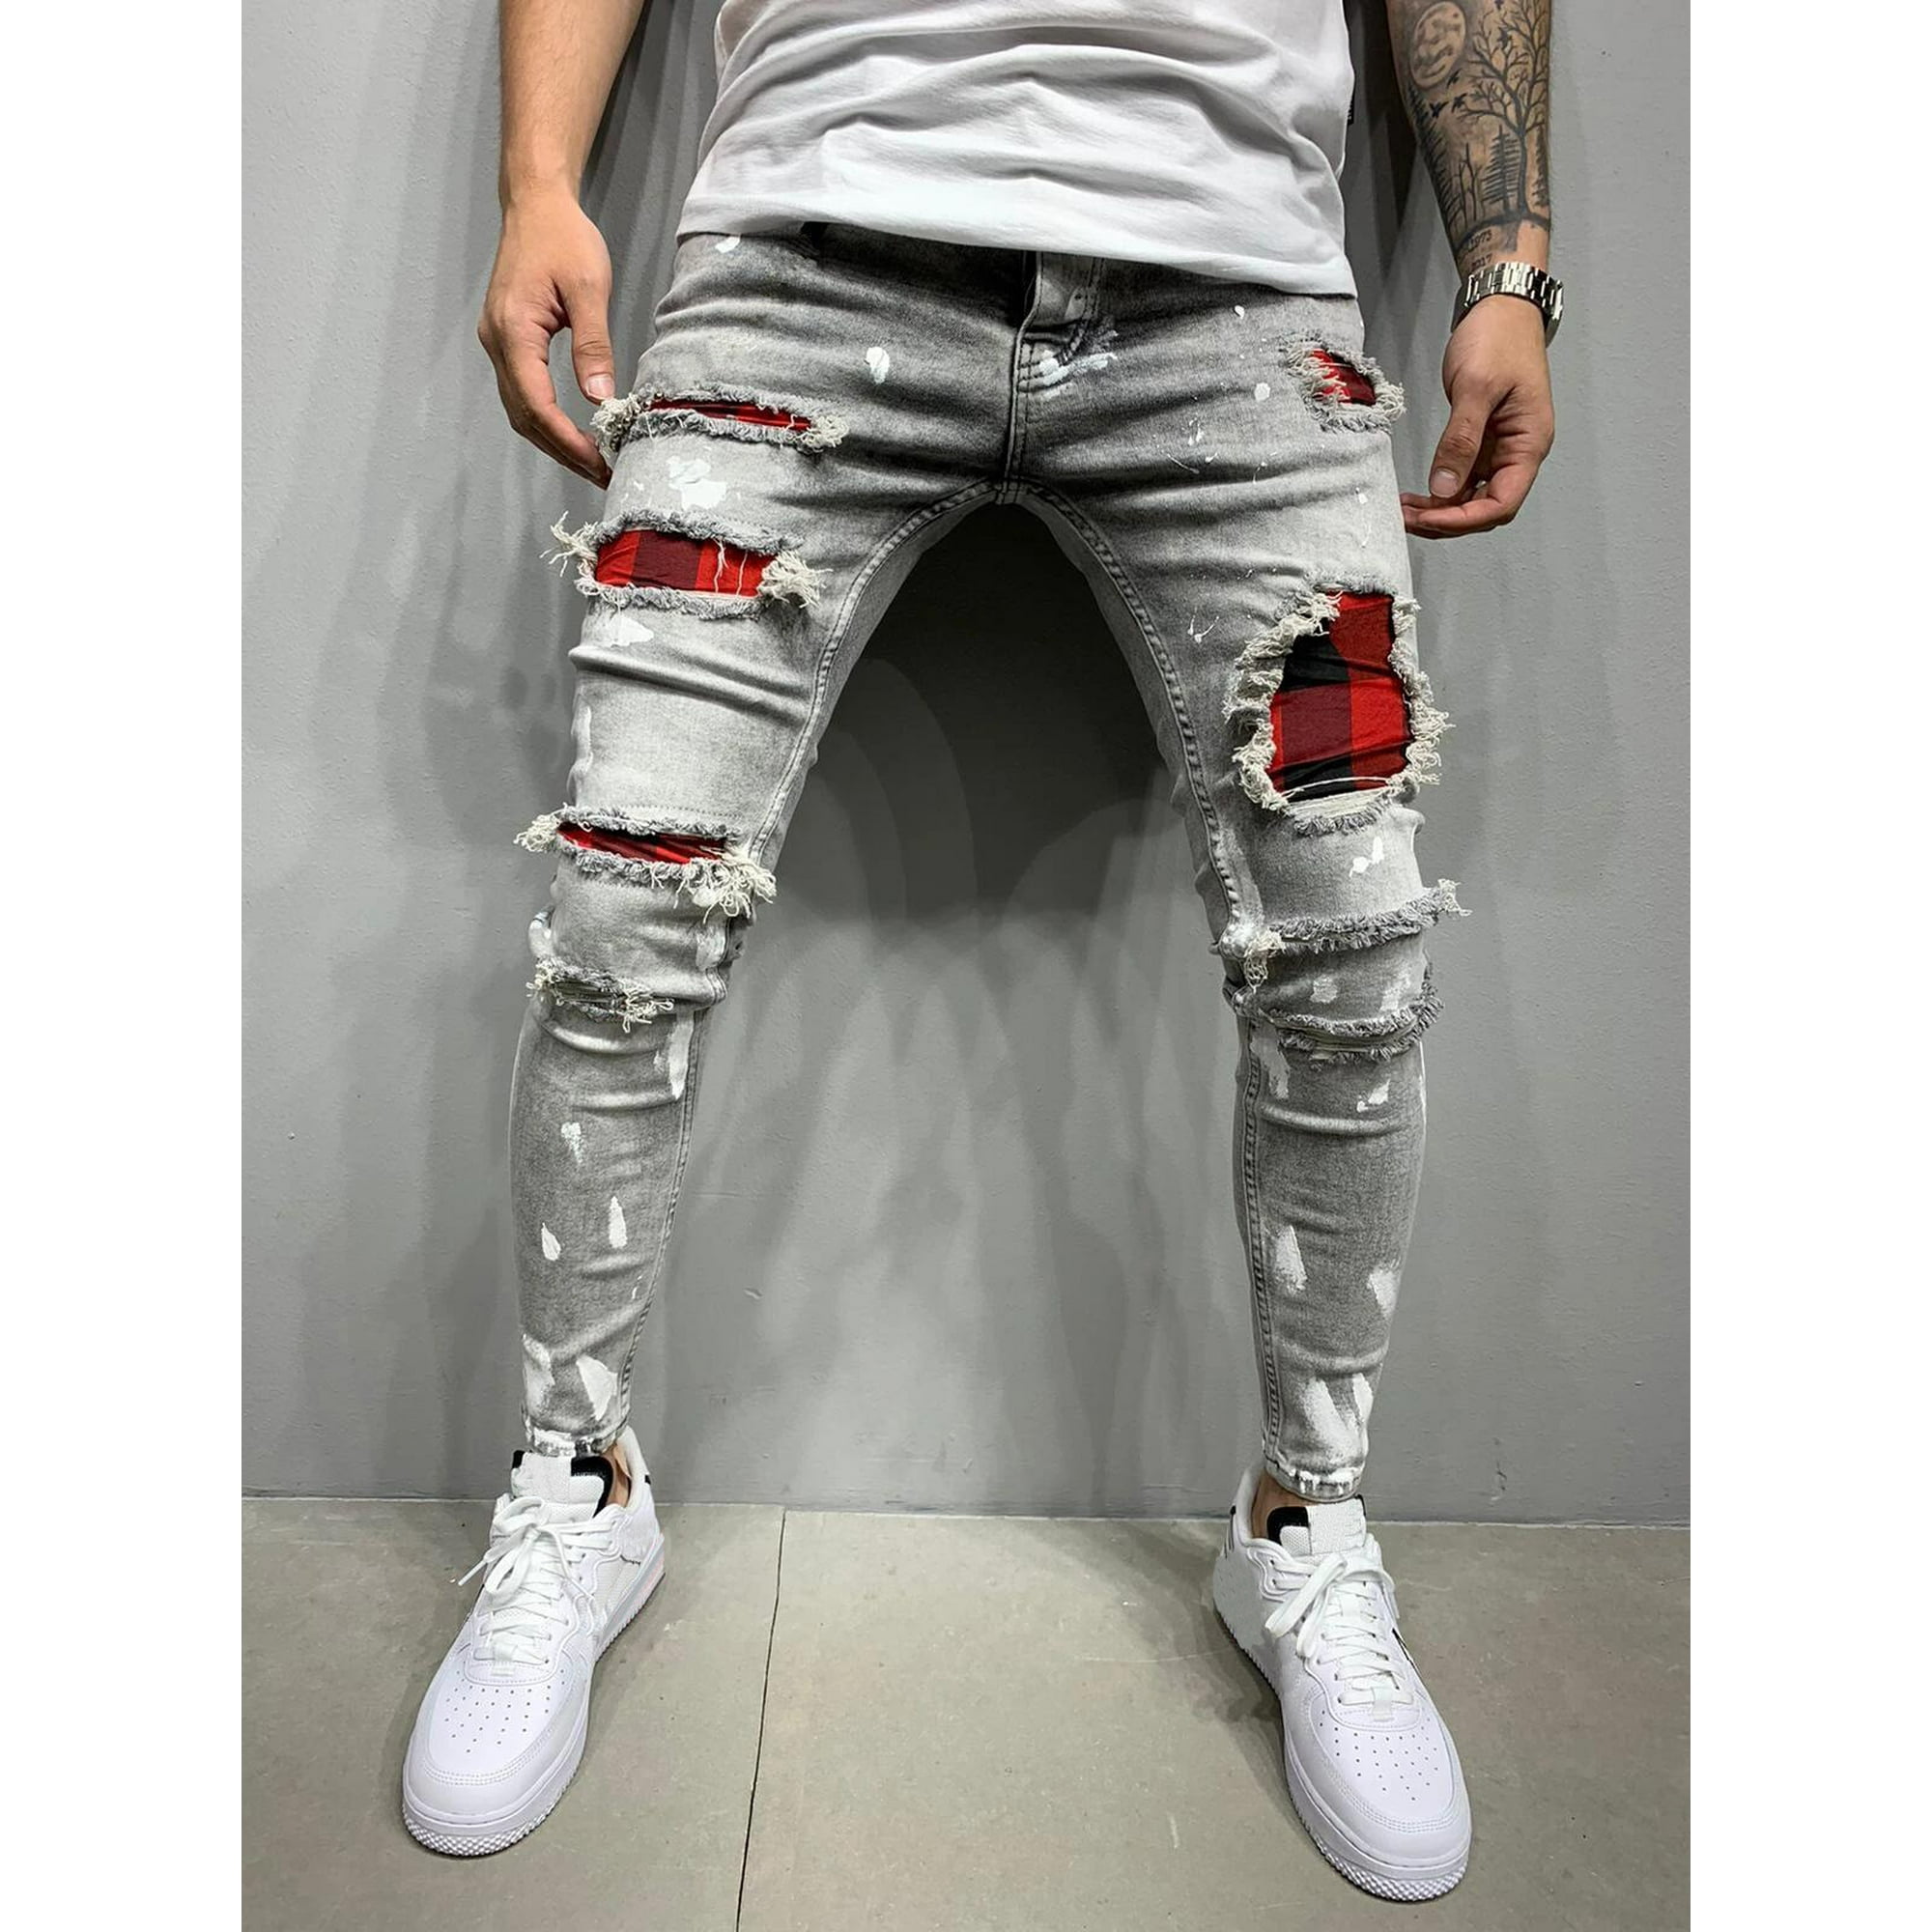 Ende legeplads Pompeji Musuos Men´s Slim Ripped Patch Jeans, Stretch Tapered Leg Long Skinny Denim  Pants for Casual and Street Shoot - Walmart.com